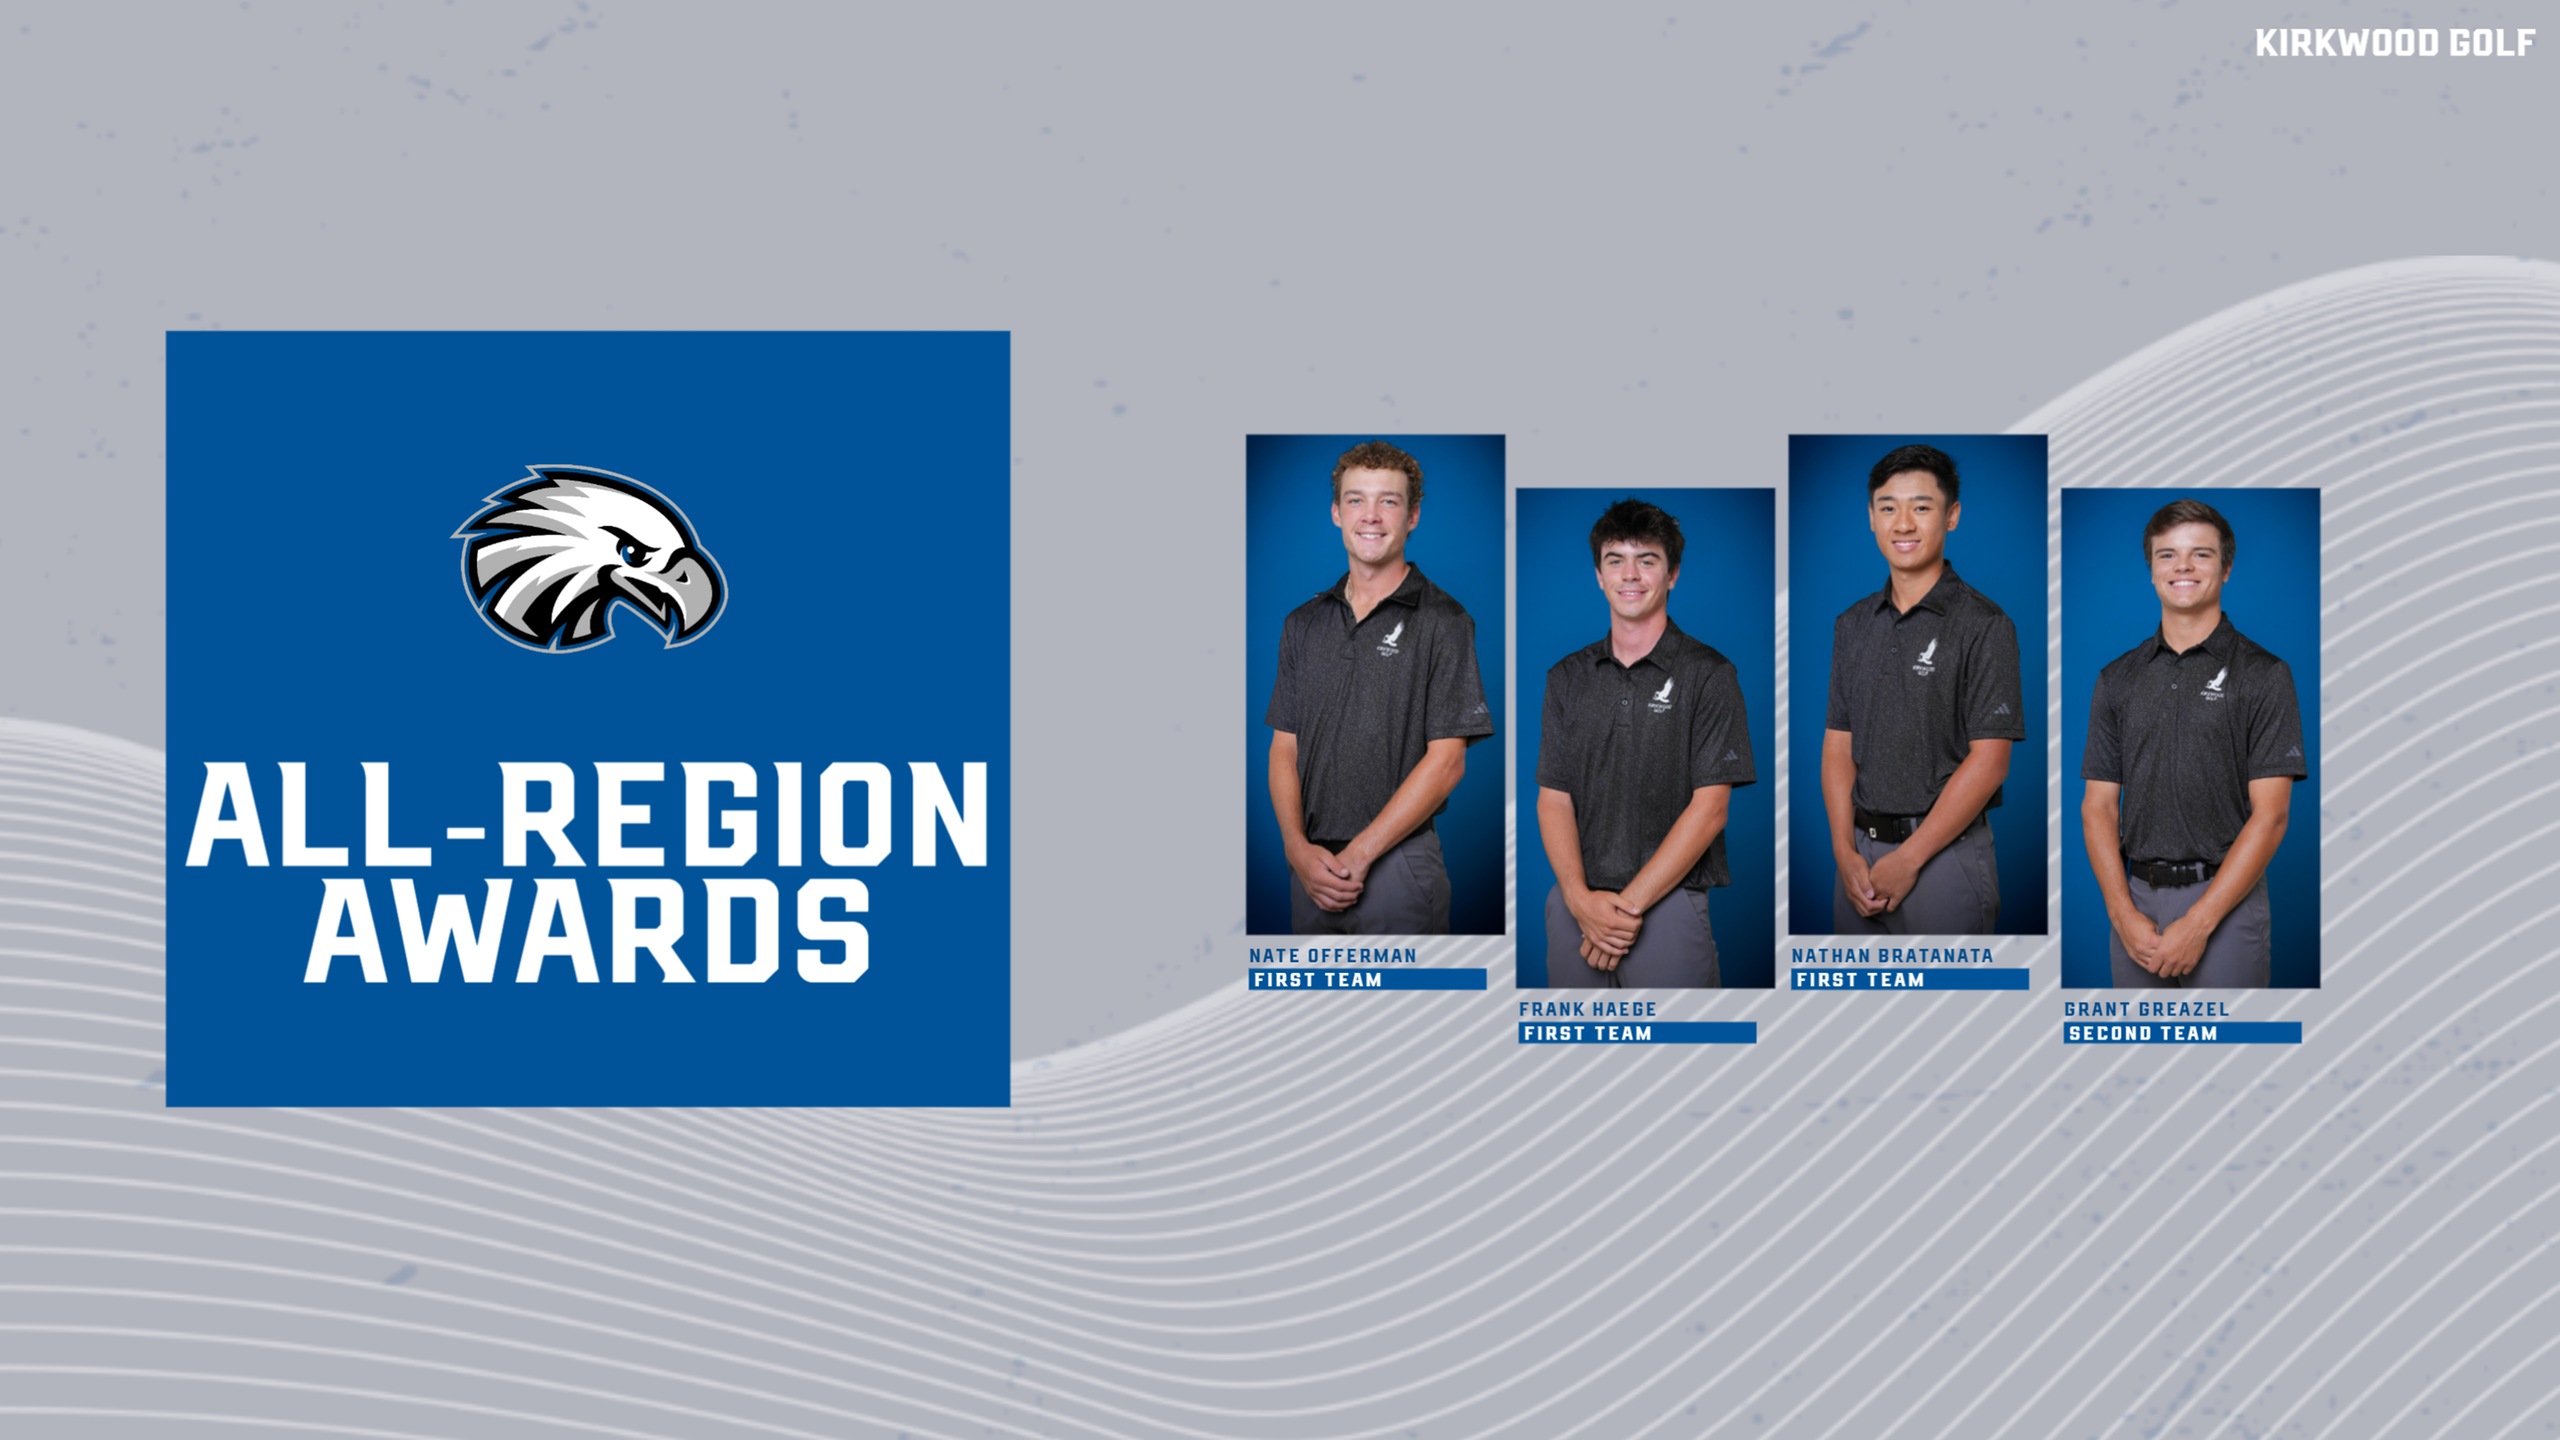 Kirkwood Golf Honored With All-Region Awards